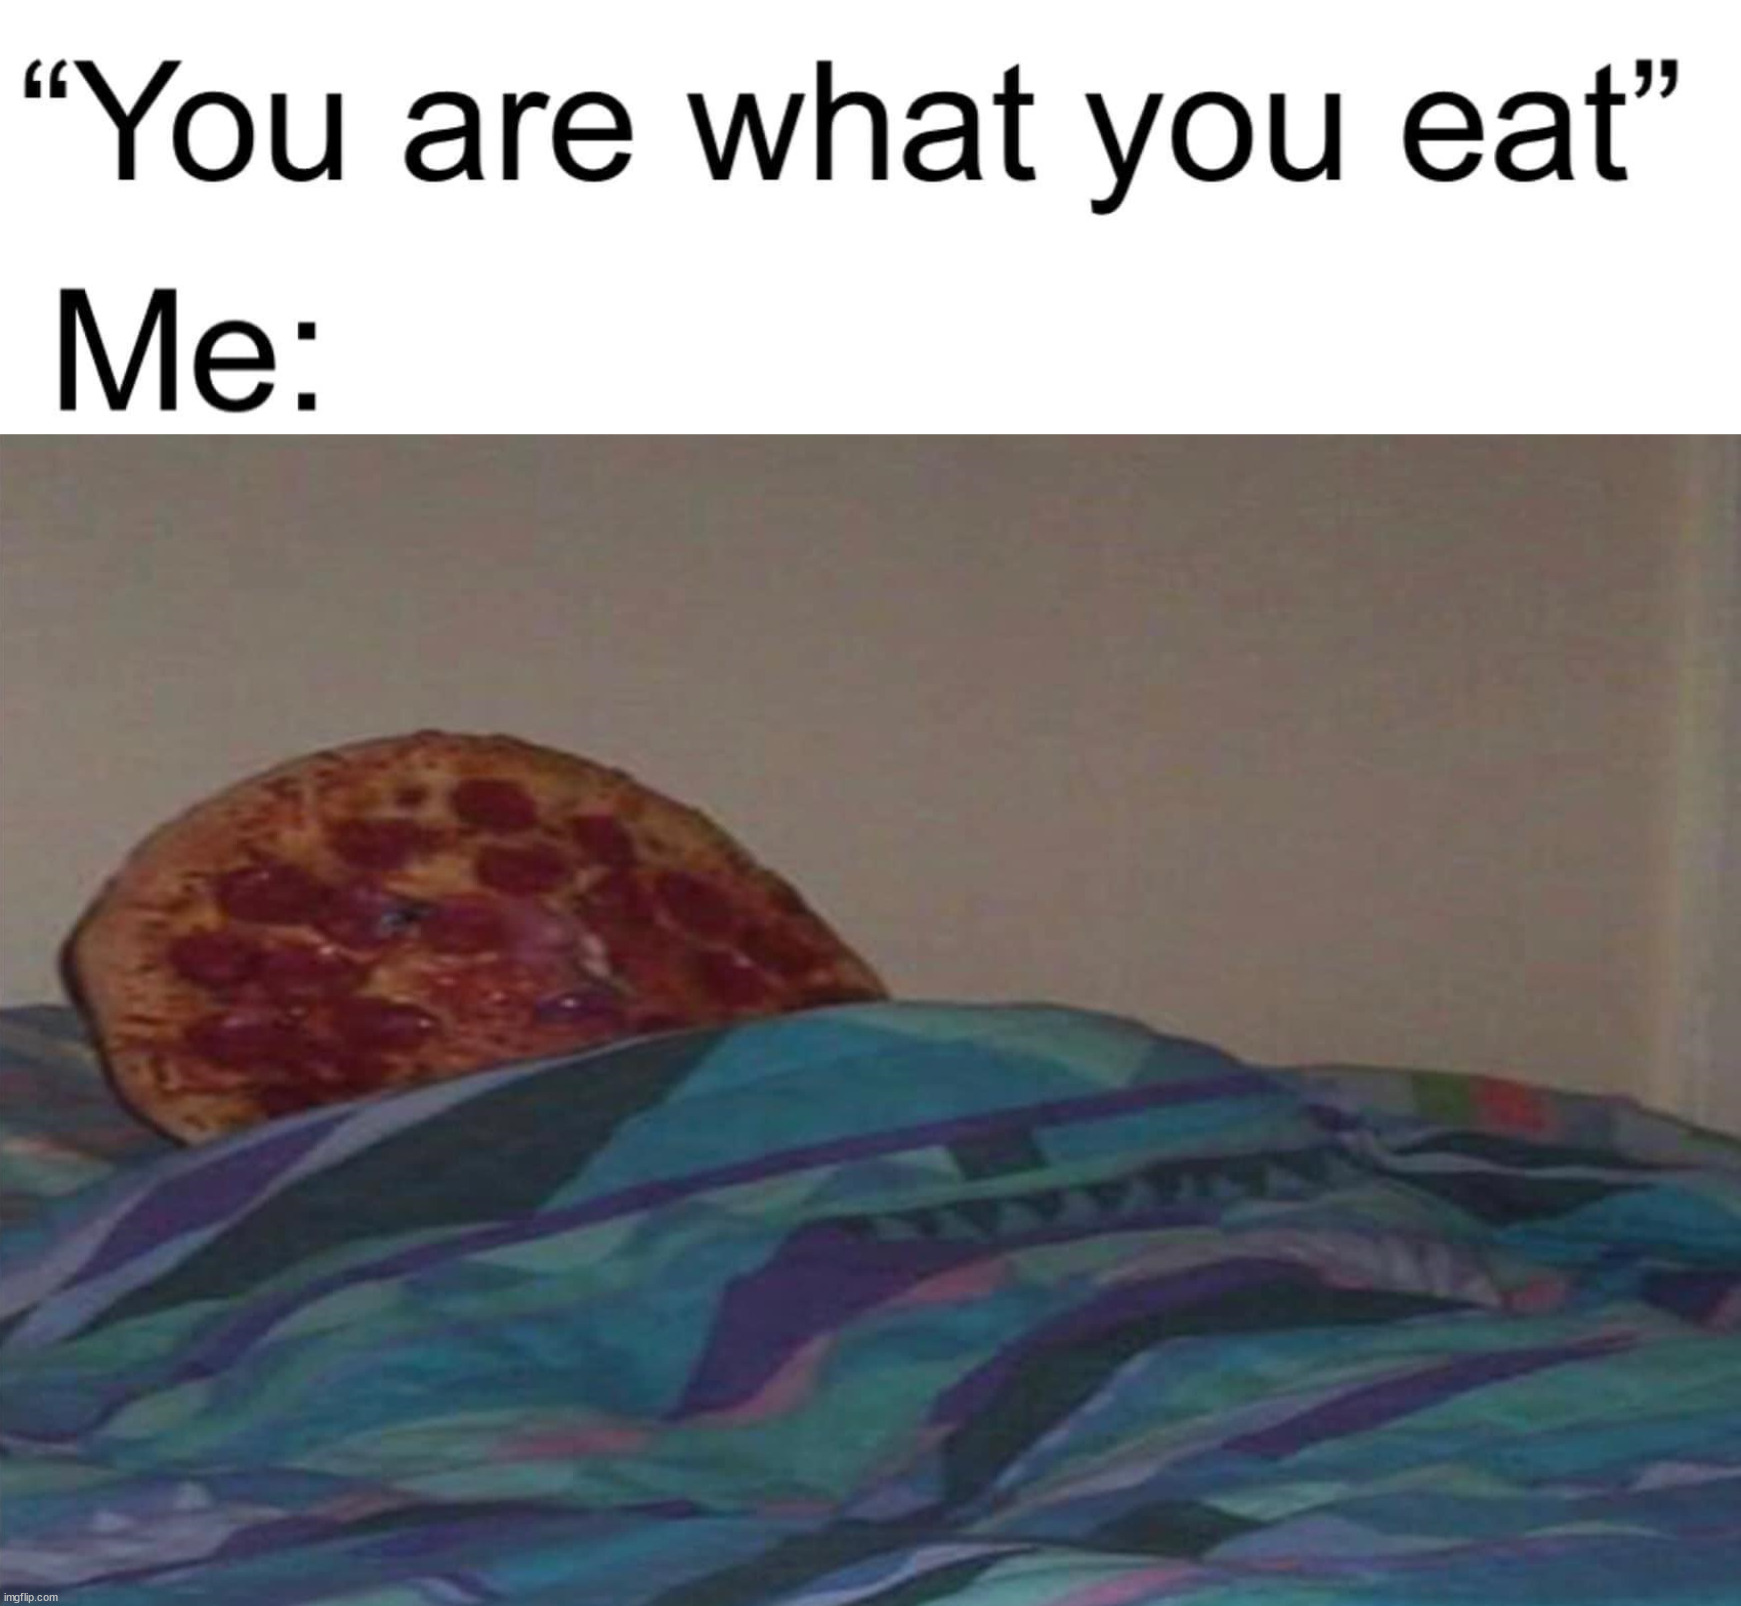 Yes, I eat a lot of pizza | image tagged in pizza | made w/ Imgflip meme maker